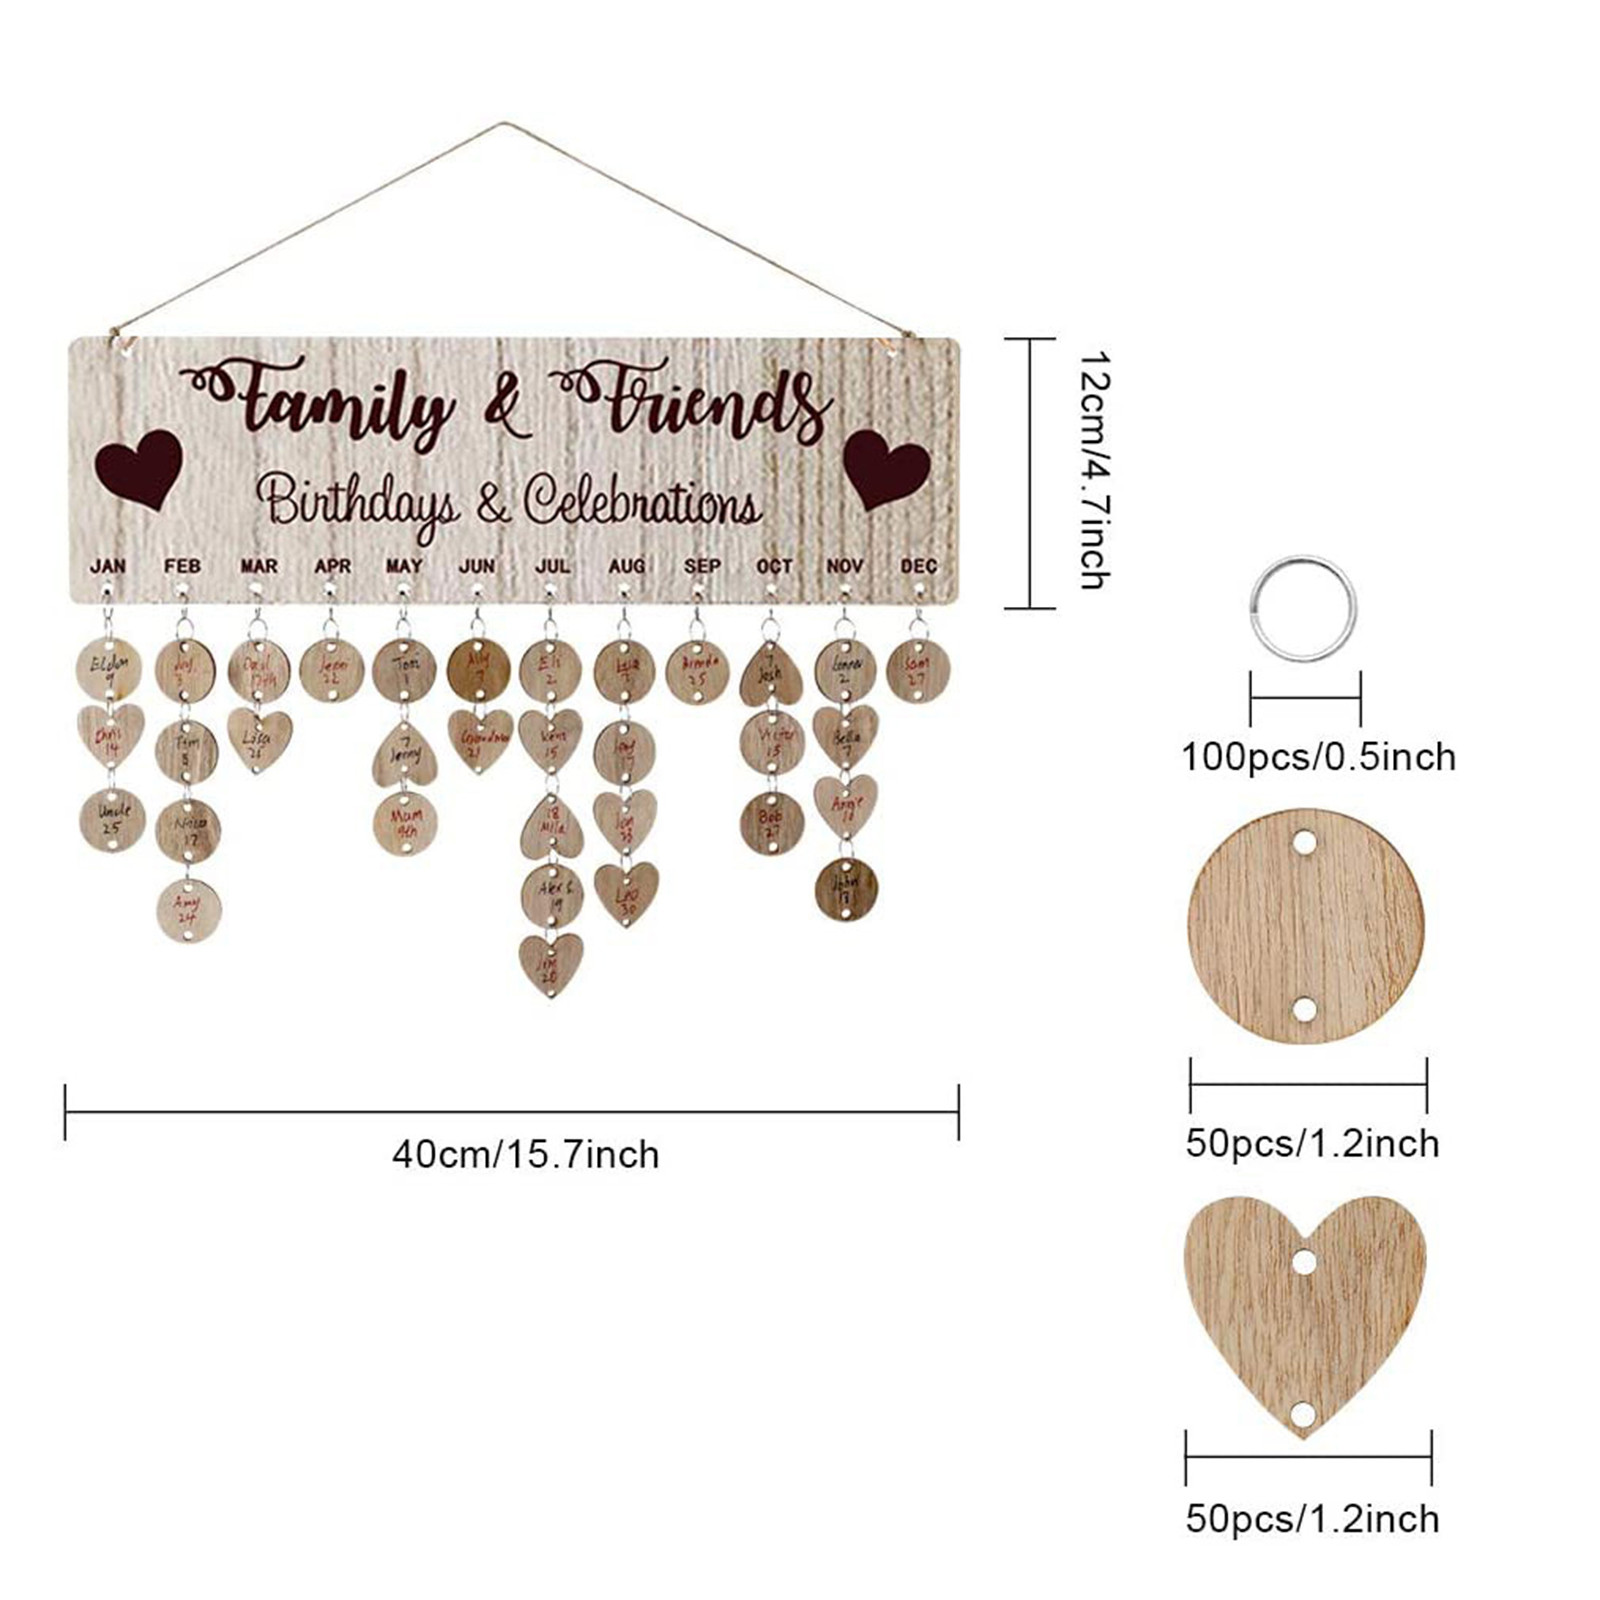 Wood Diy Friend Family Birthday Reminder Calender Board Anniversary Tracker Plaque Wall Hanging Calendar Hanging Decorations